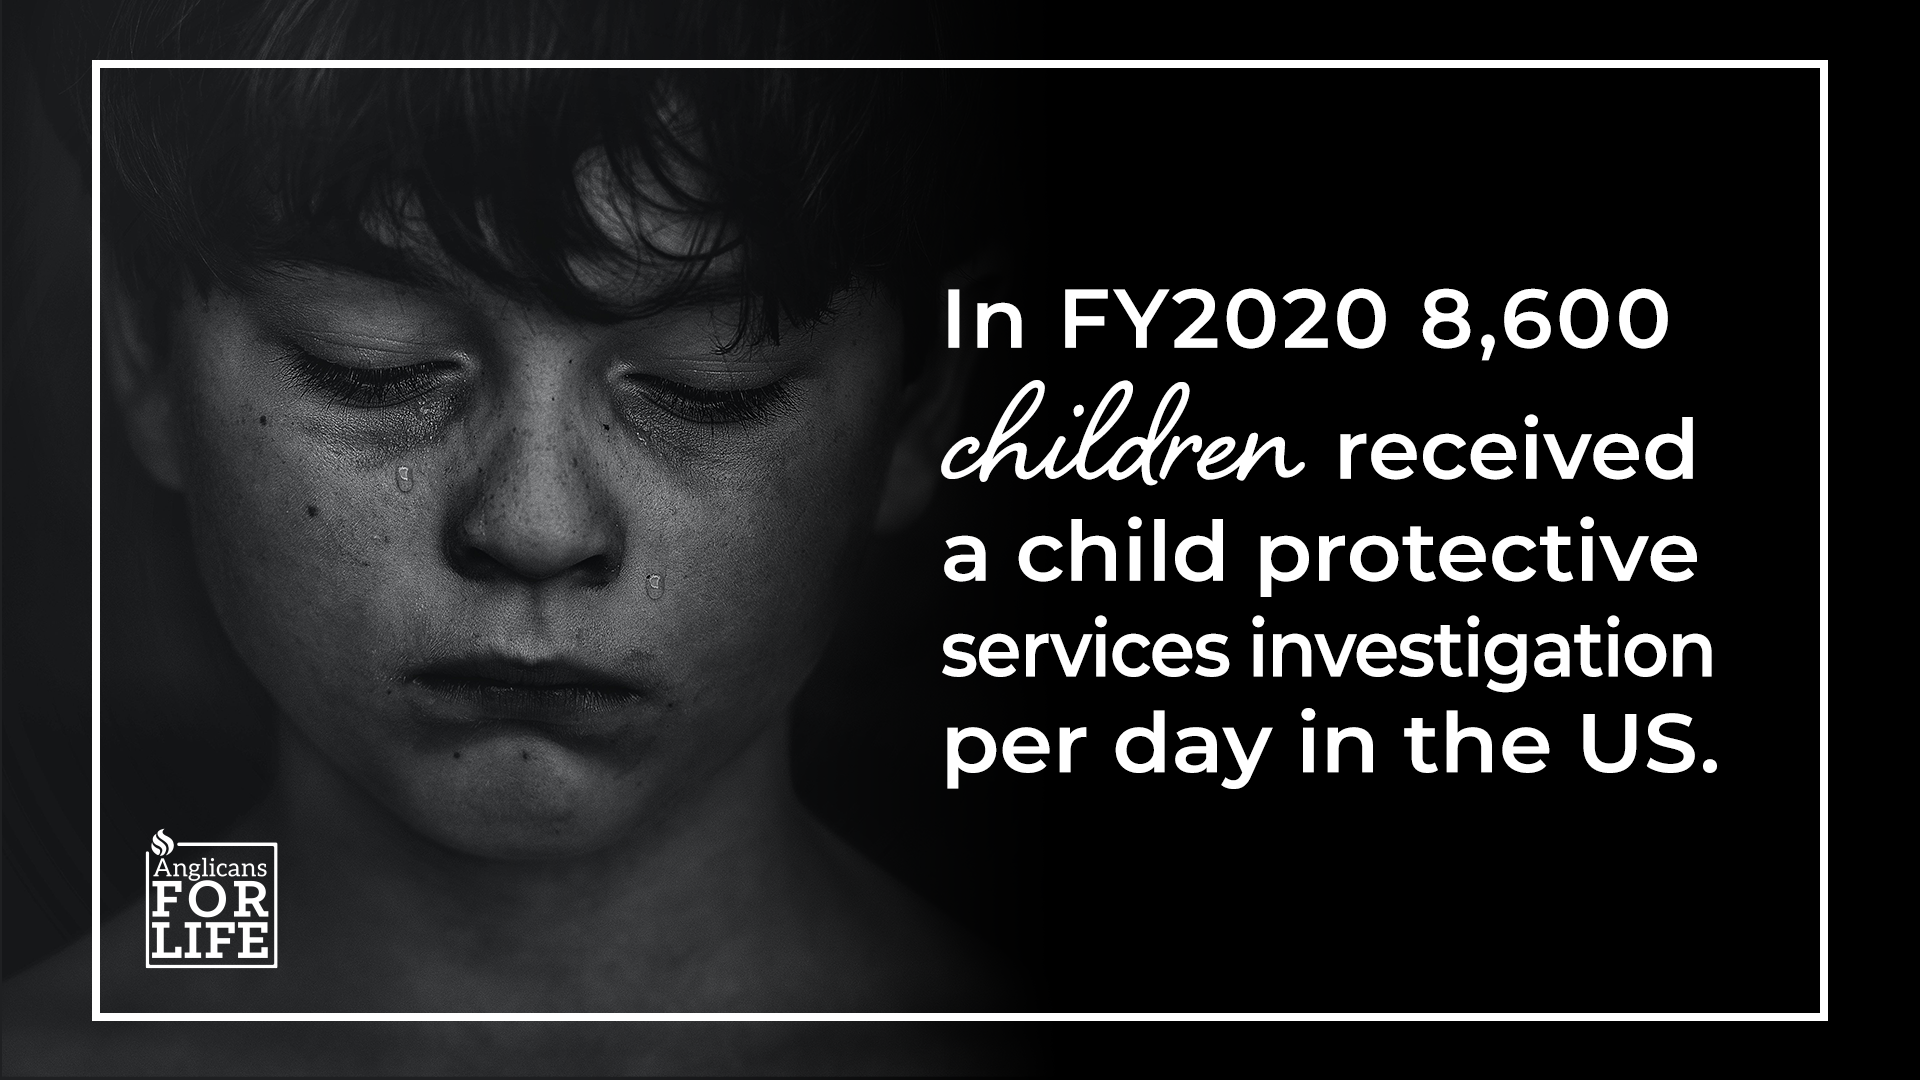 In FY2020, 8,600 children received a child protective services investigation per day in the US